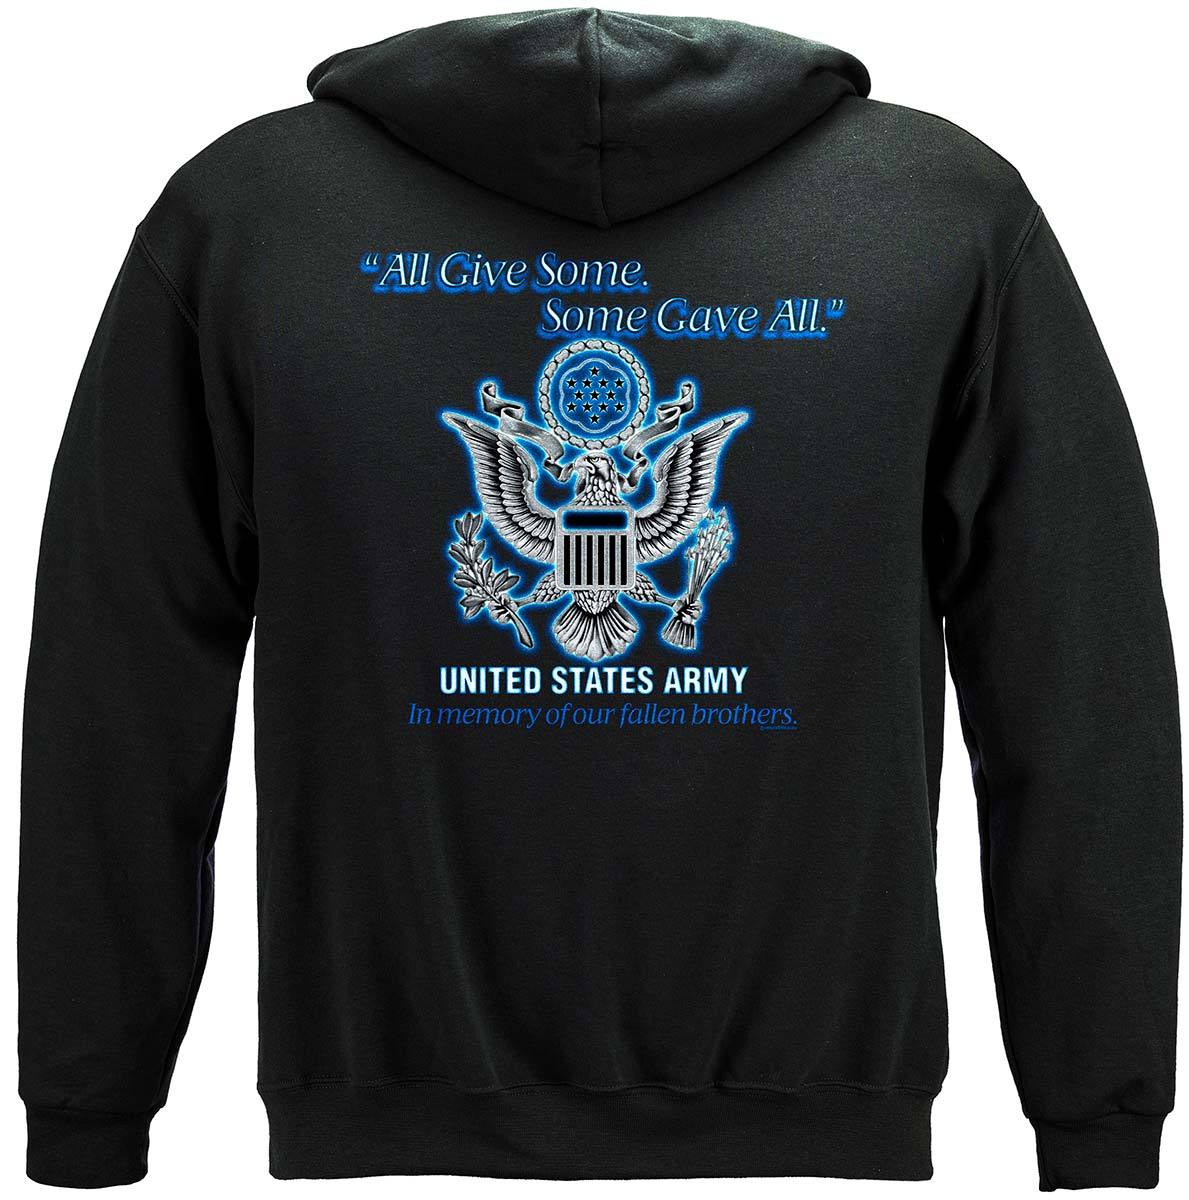 Army Gave All Premium Hooded Sweat Shirt